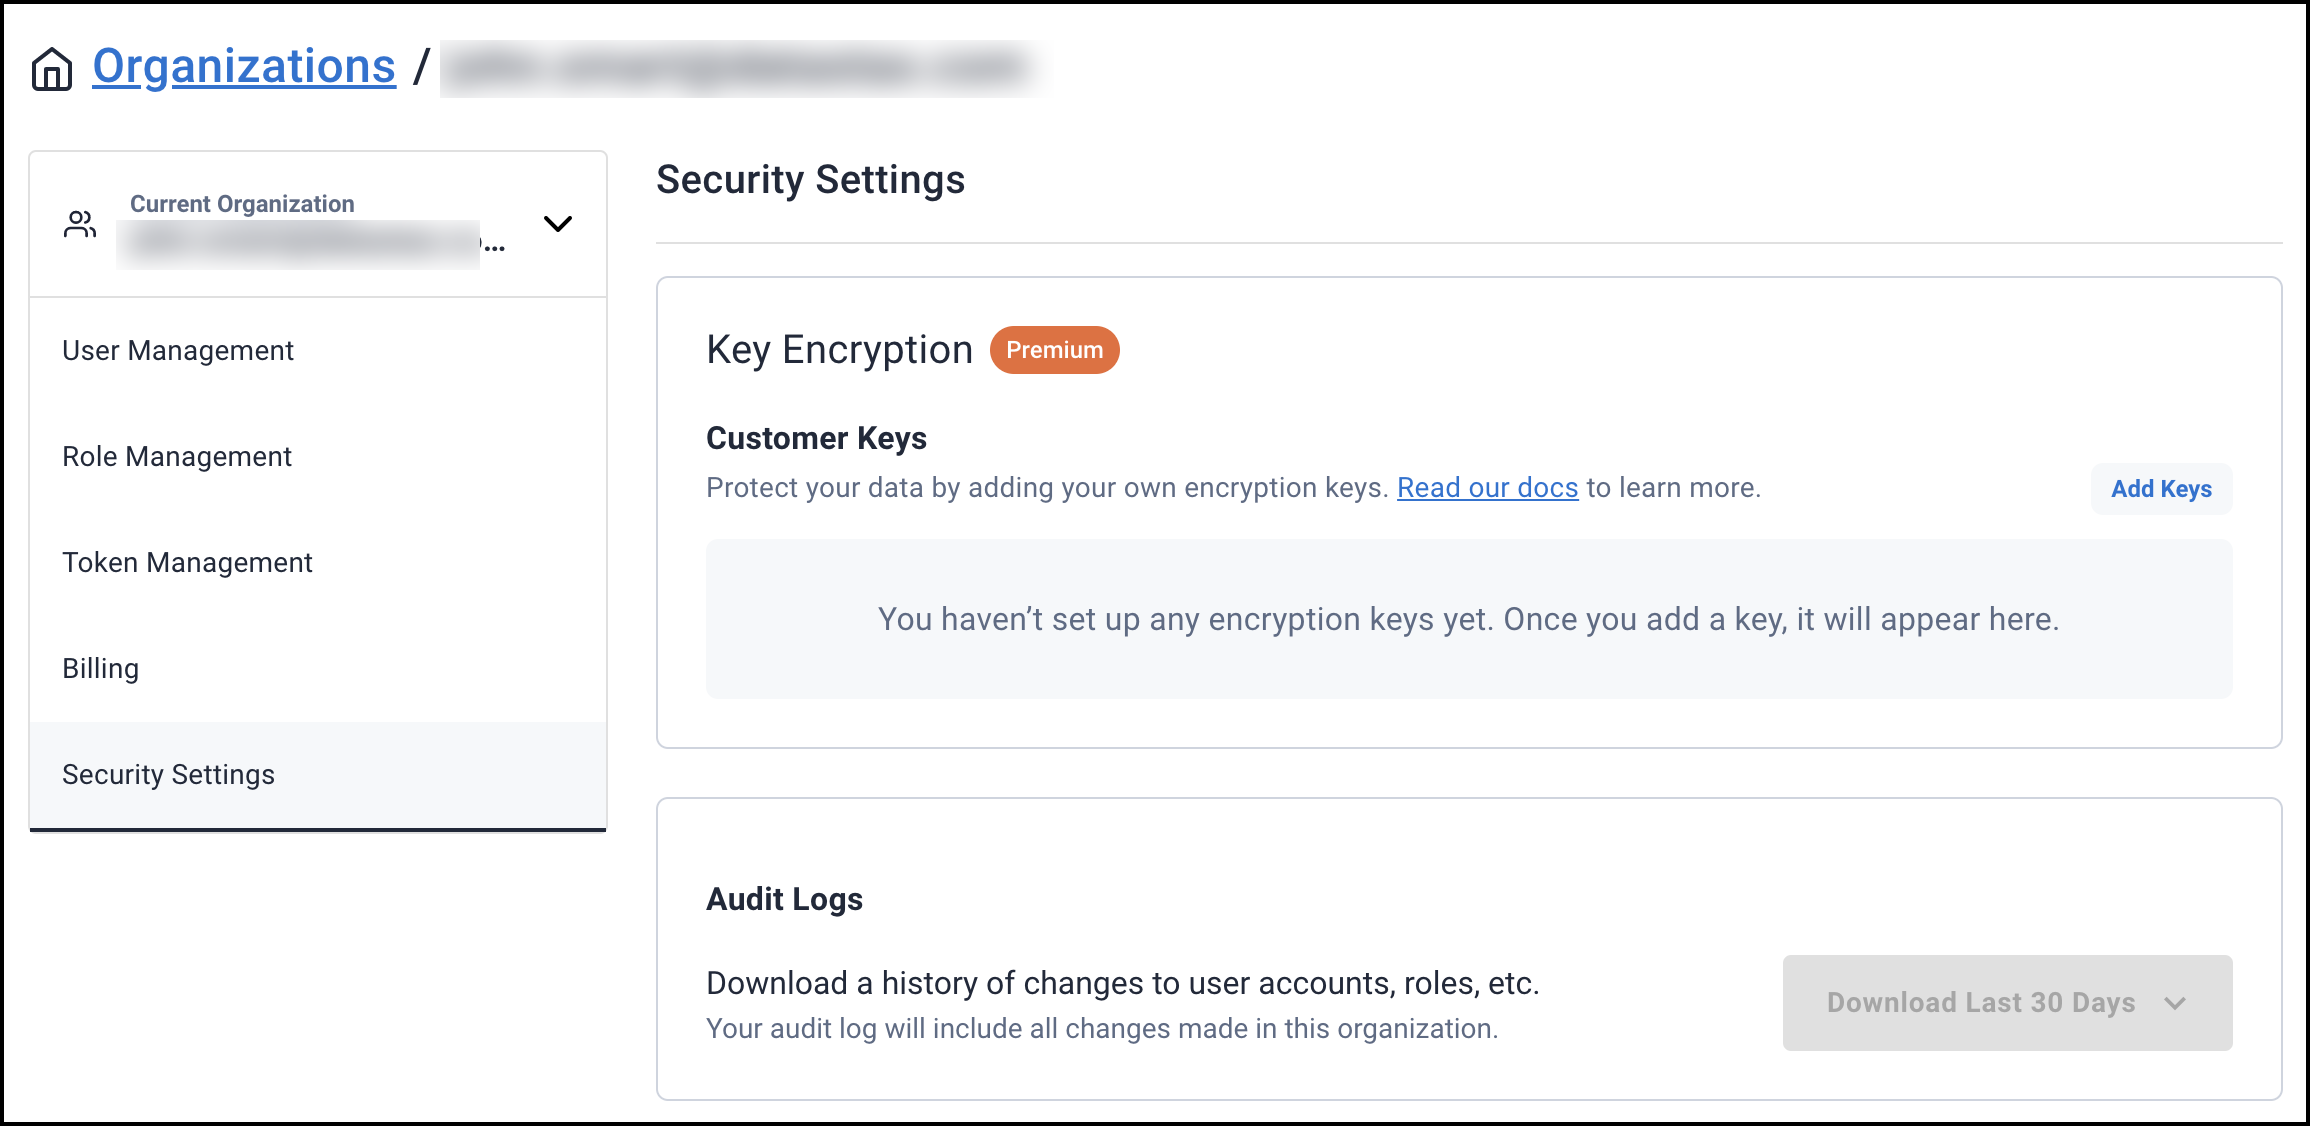 Astra DB console’s Security Settings and Key Encryption UI